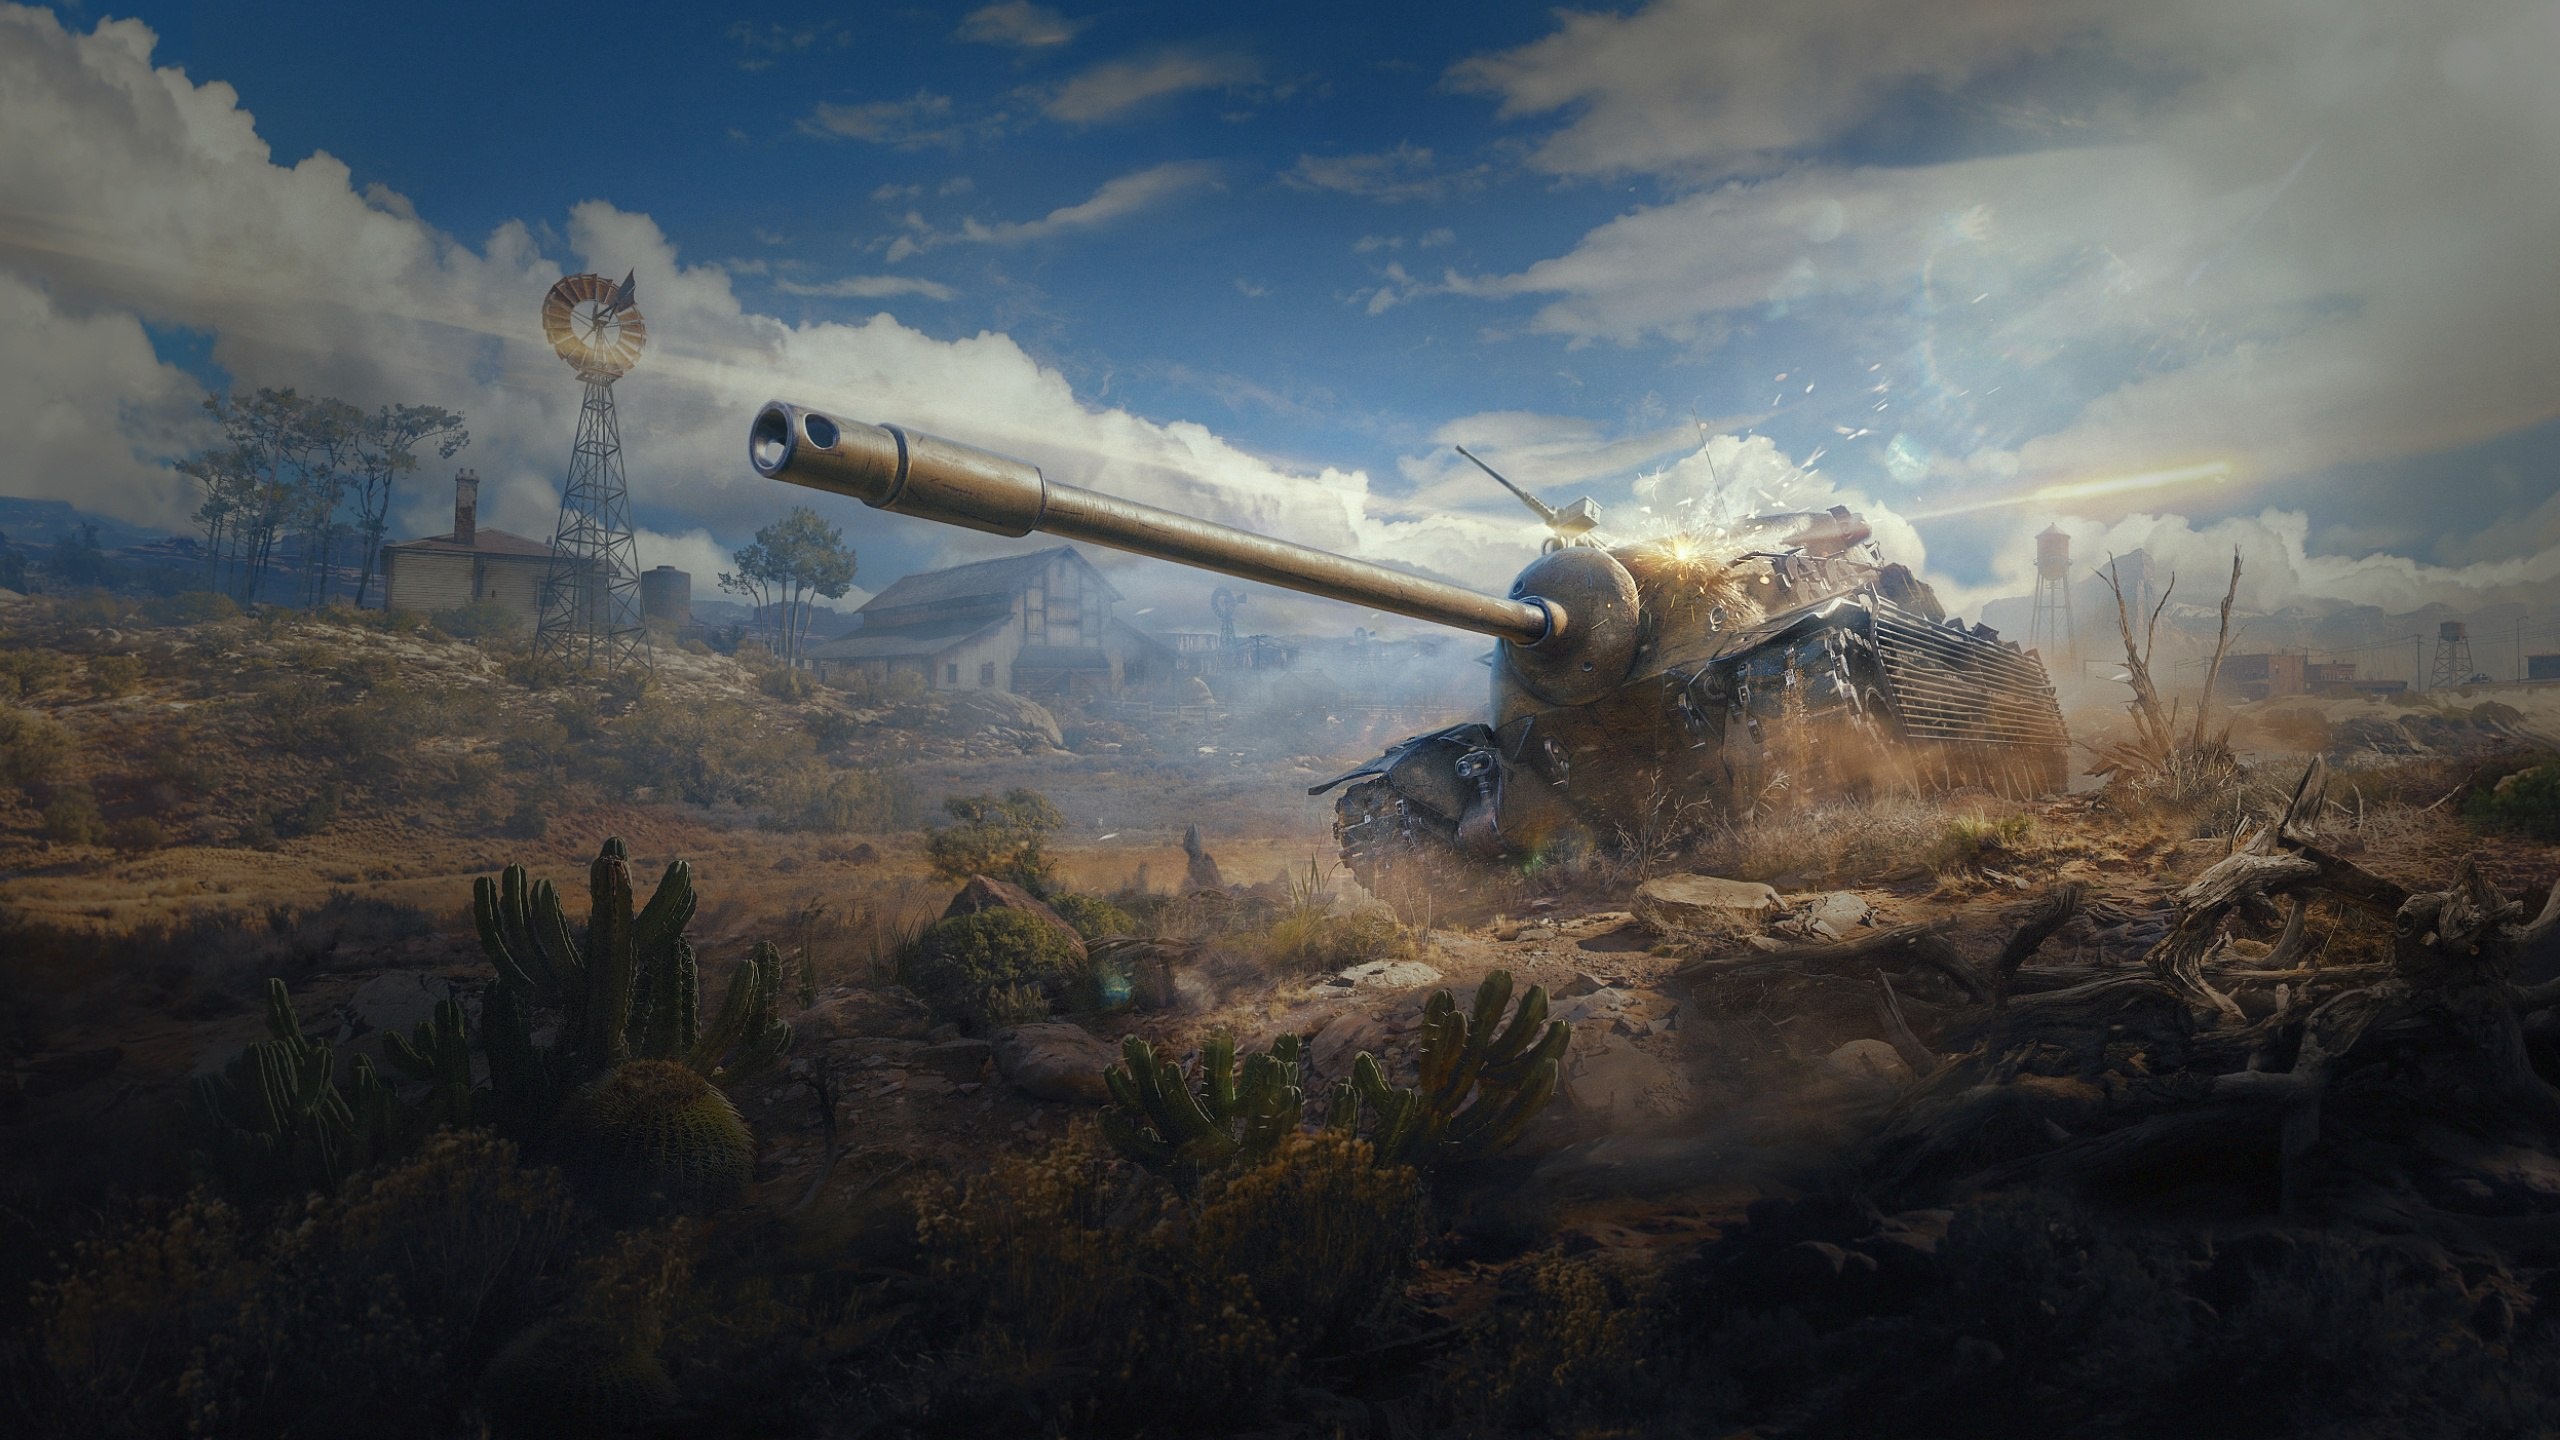 Video Game World Of Tanks HD Wallpaper | Background Image